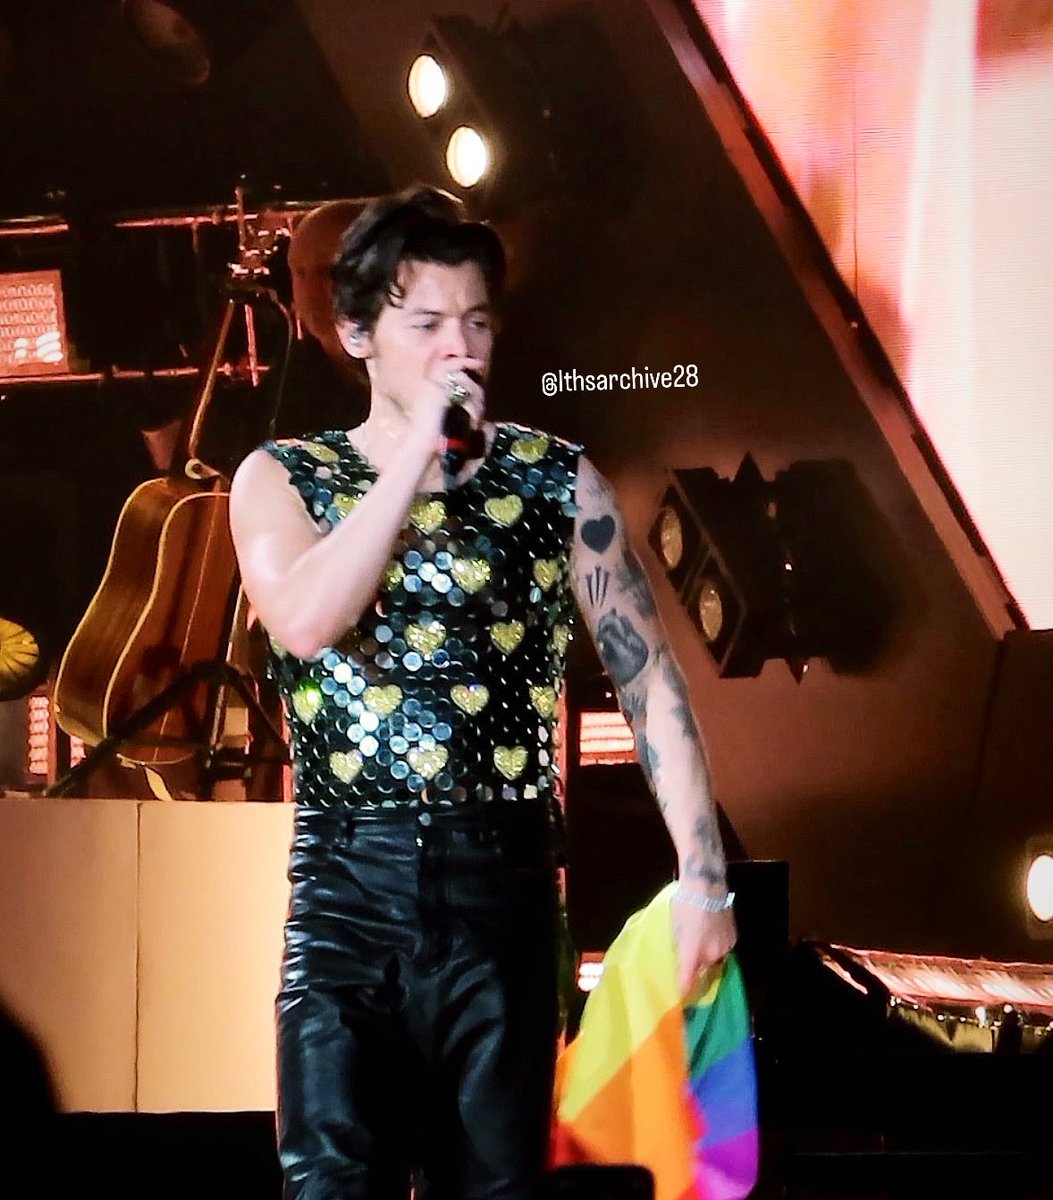 Harry with a pride flag! 🏳️‍🌈
#LoveOnTourAmsterdam #Night2
5.6.23

📸: lthsarchive28